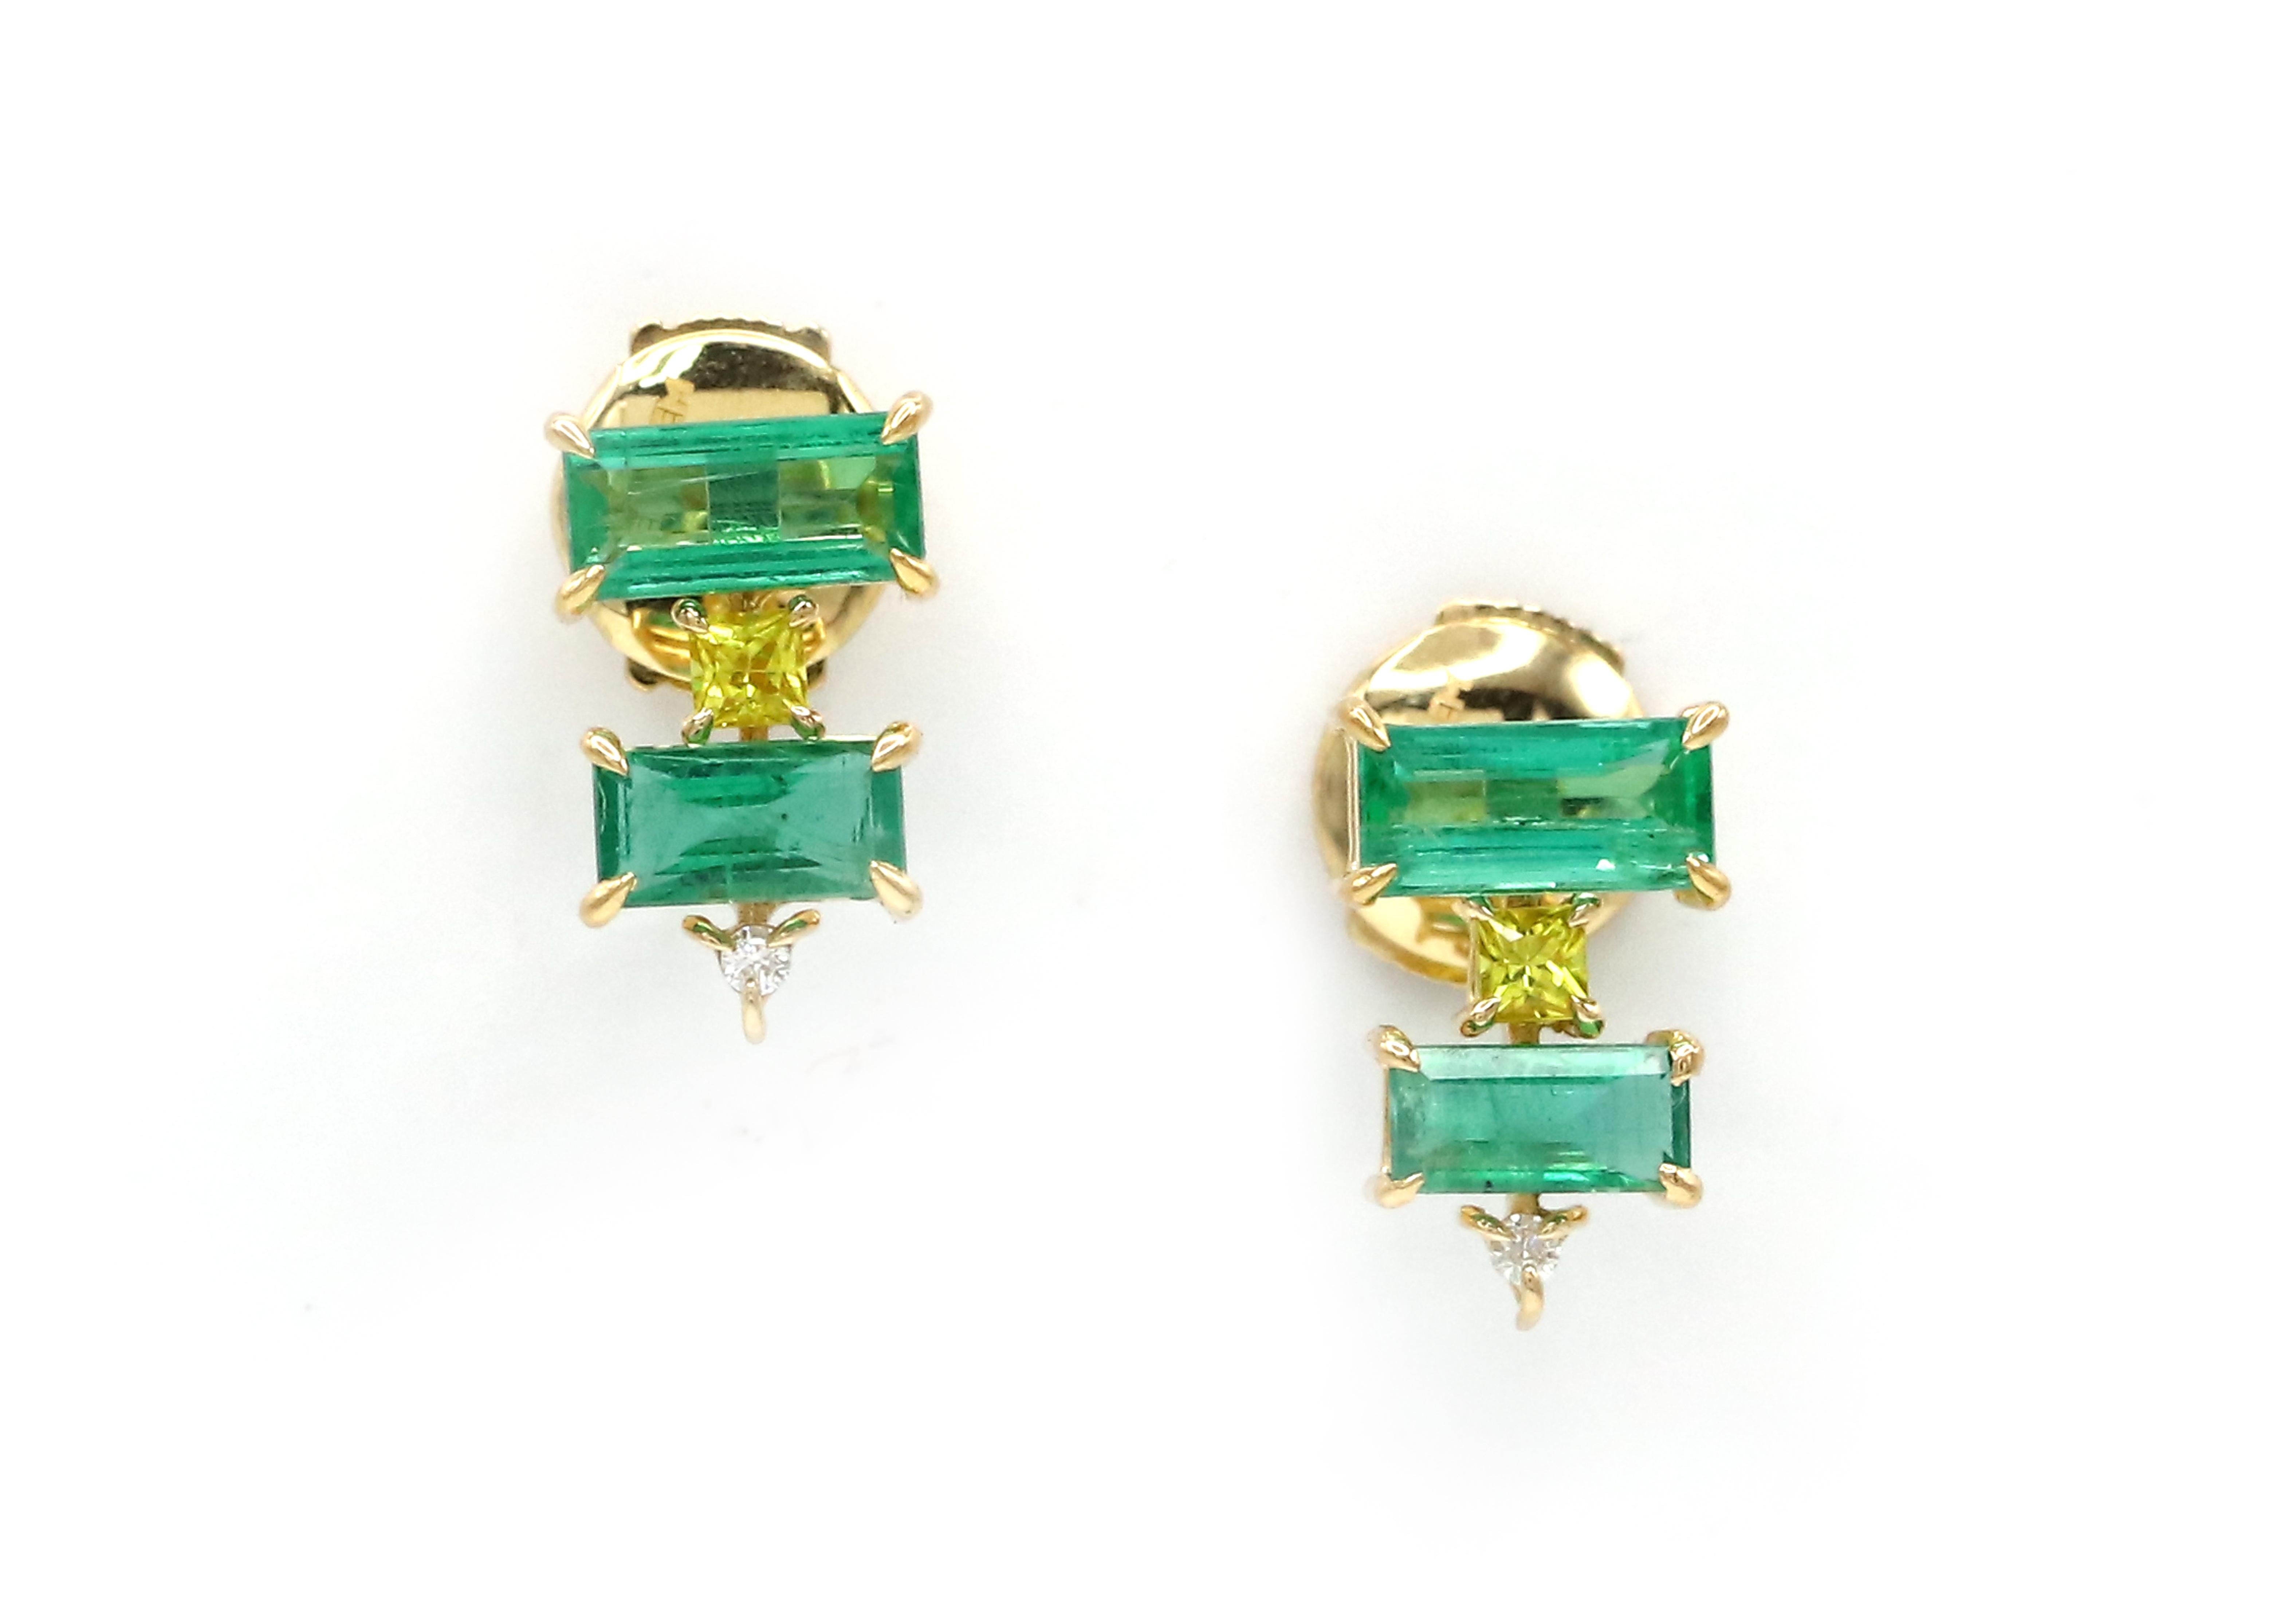 These earrings is where the iconic Art Deco meets contemporary jewelry. These elegant 18 K yellow gold earrings feature gorgeous rectangular clear bright emeralds, princess cut peridots and white diamonds. The Art Deco elements of the jewelry are